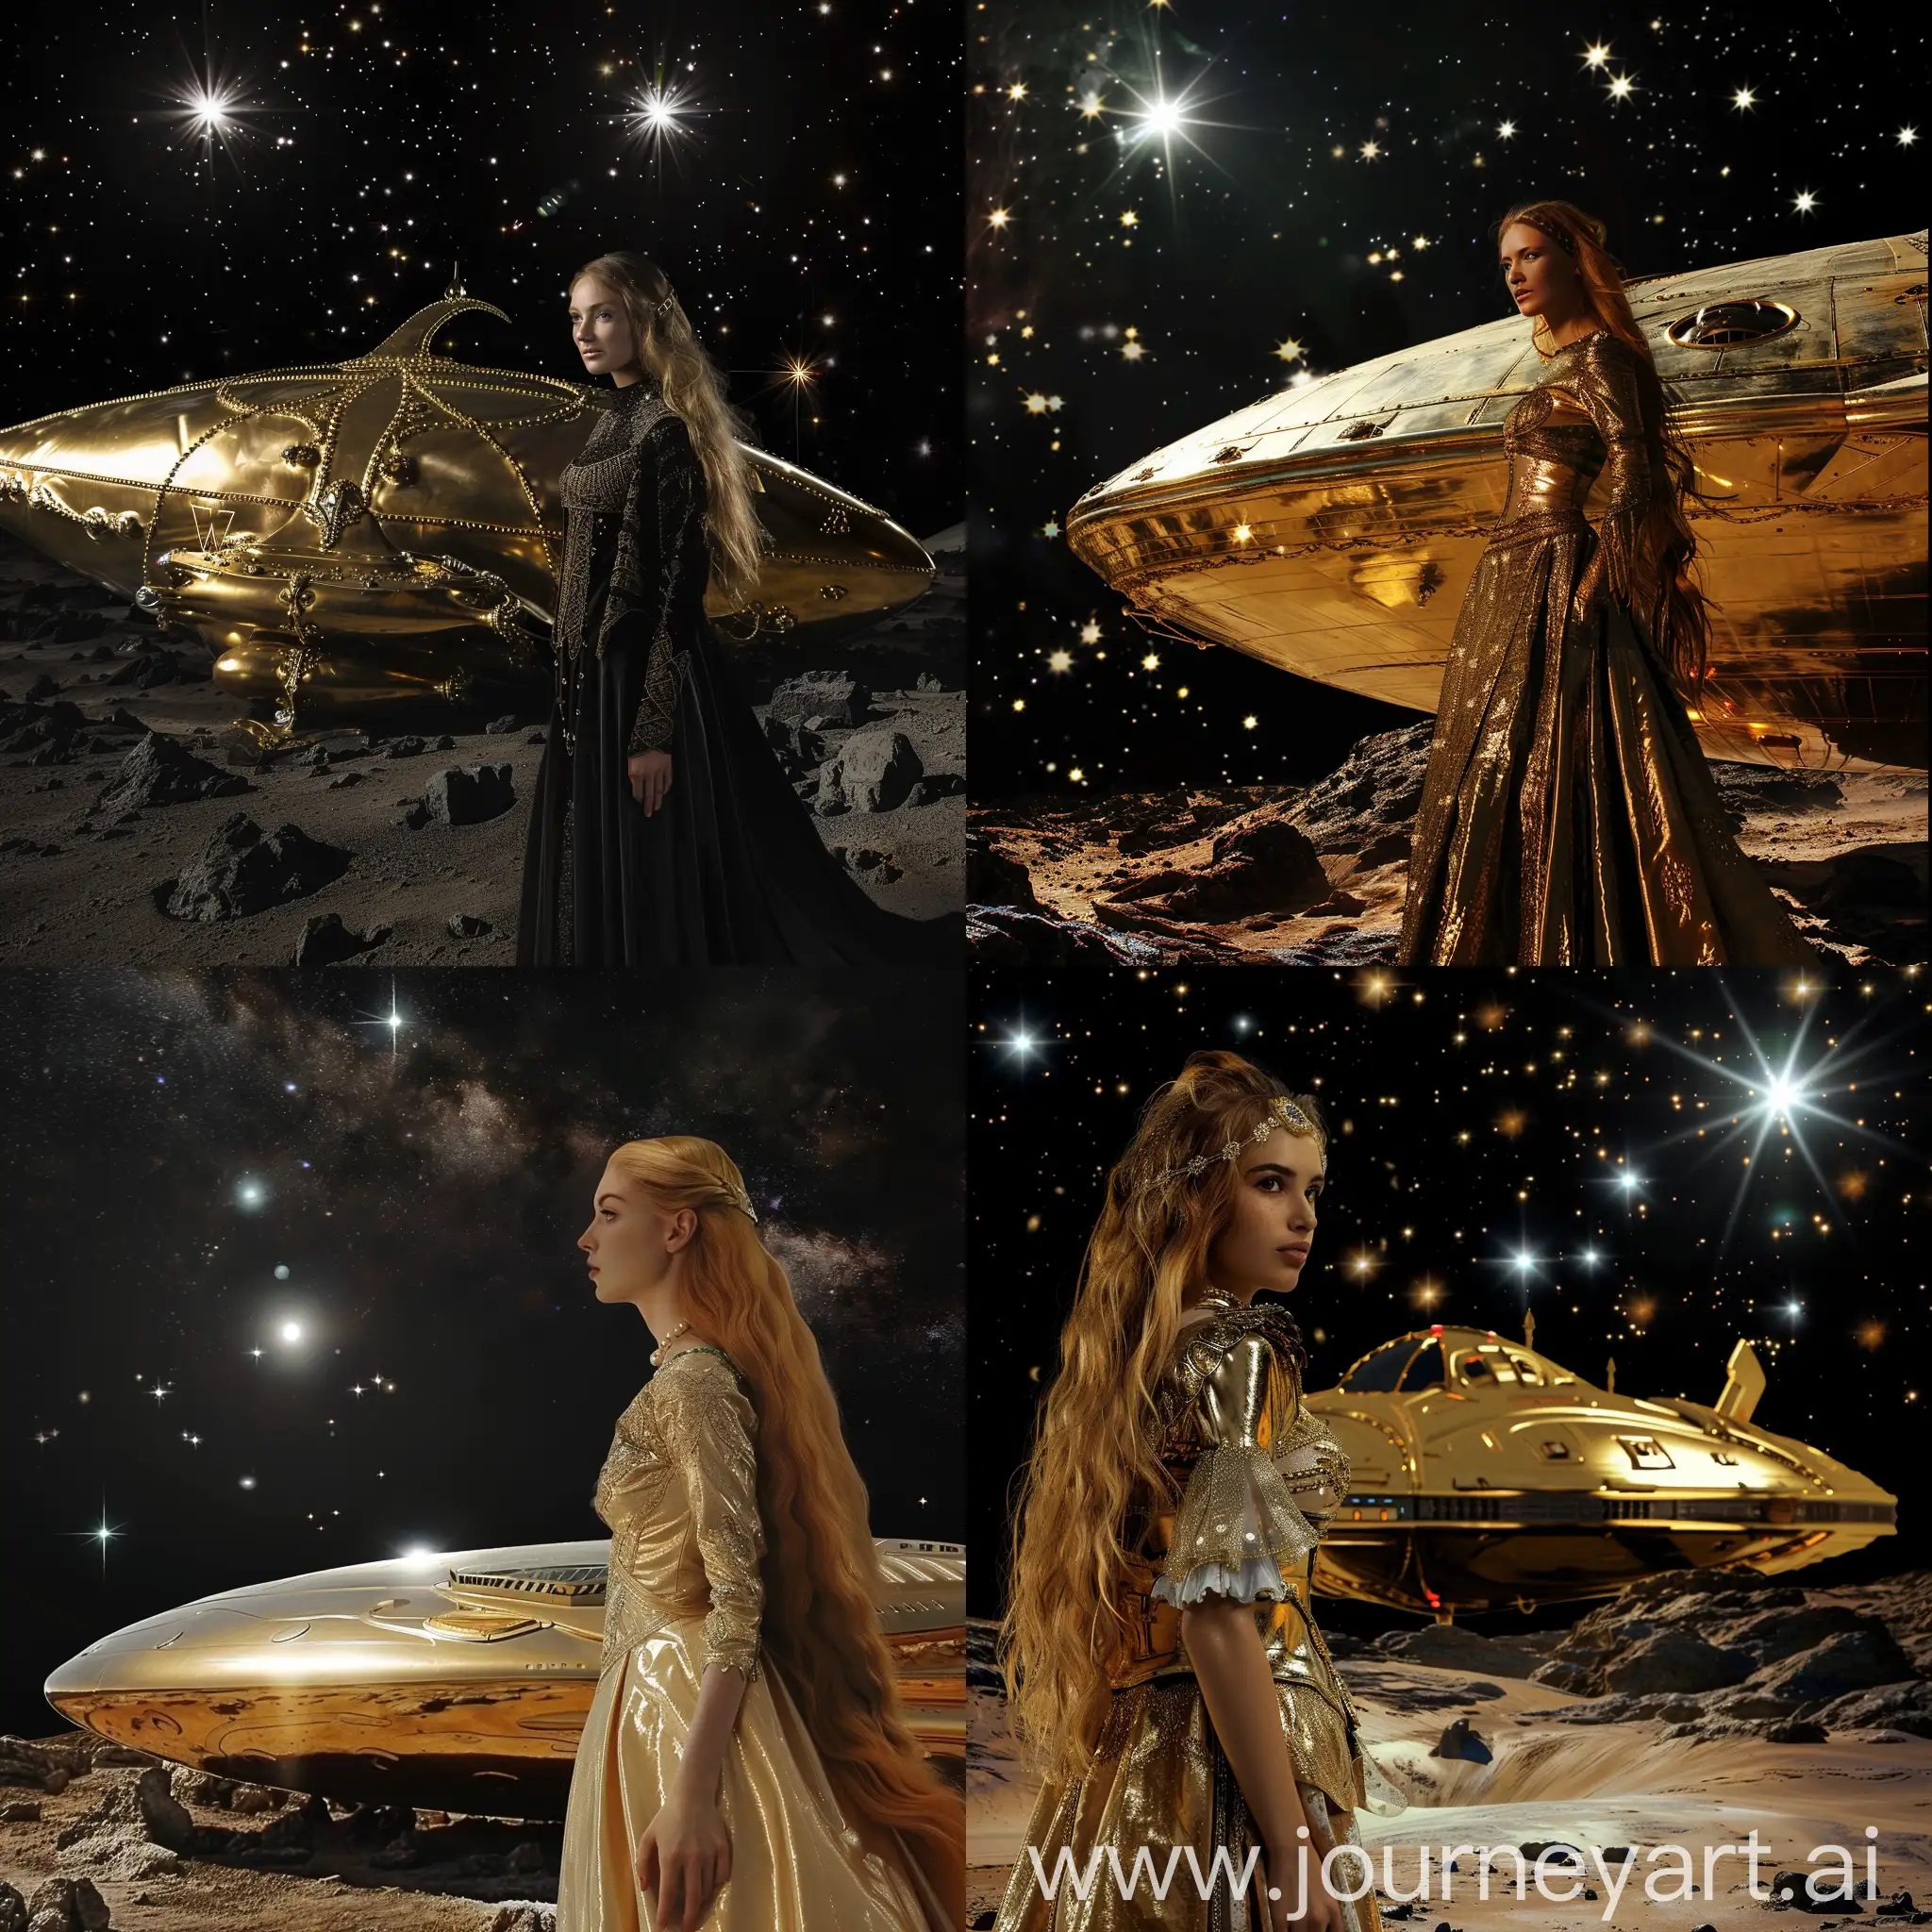 A beautiful medieval sci fi woman Infront of a pearlescent gold spaceship on an alien planet. The sky is black with bright stars